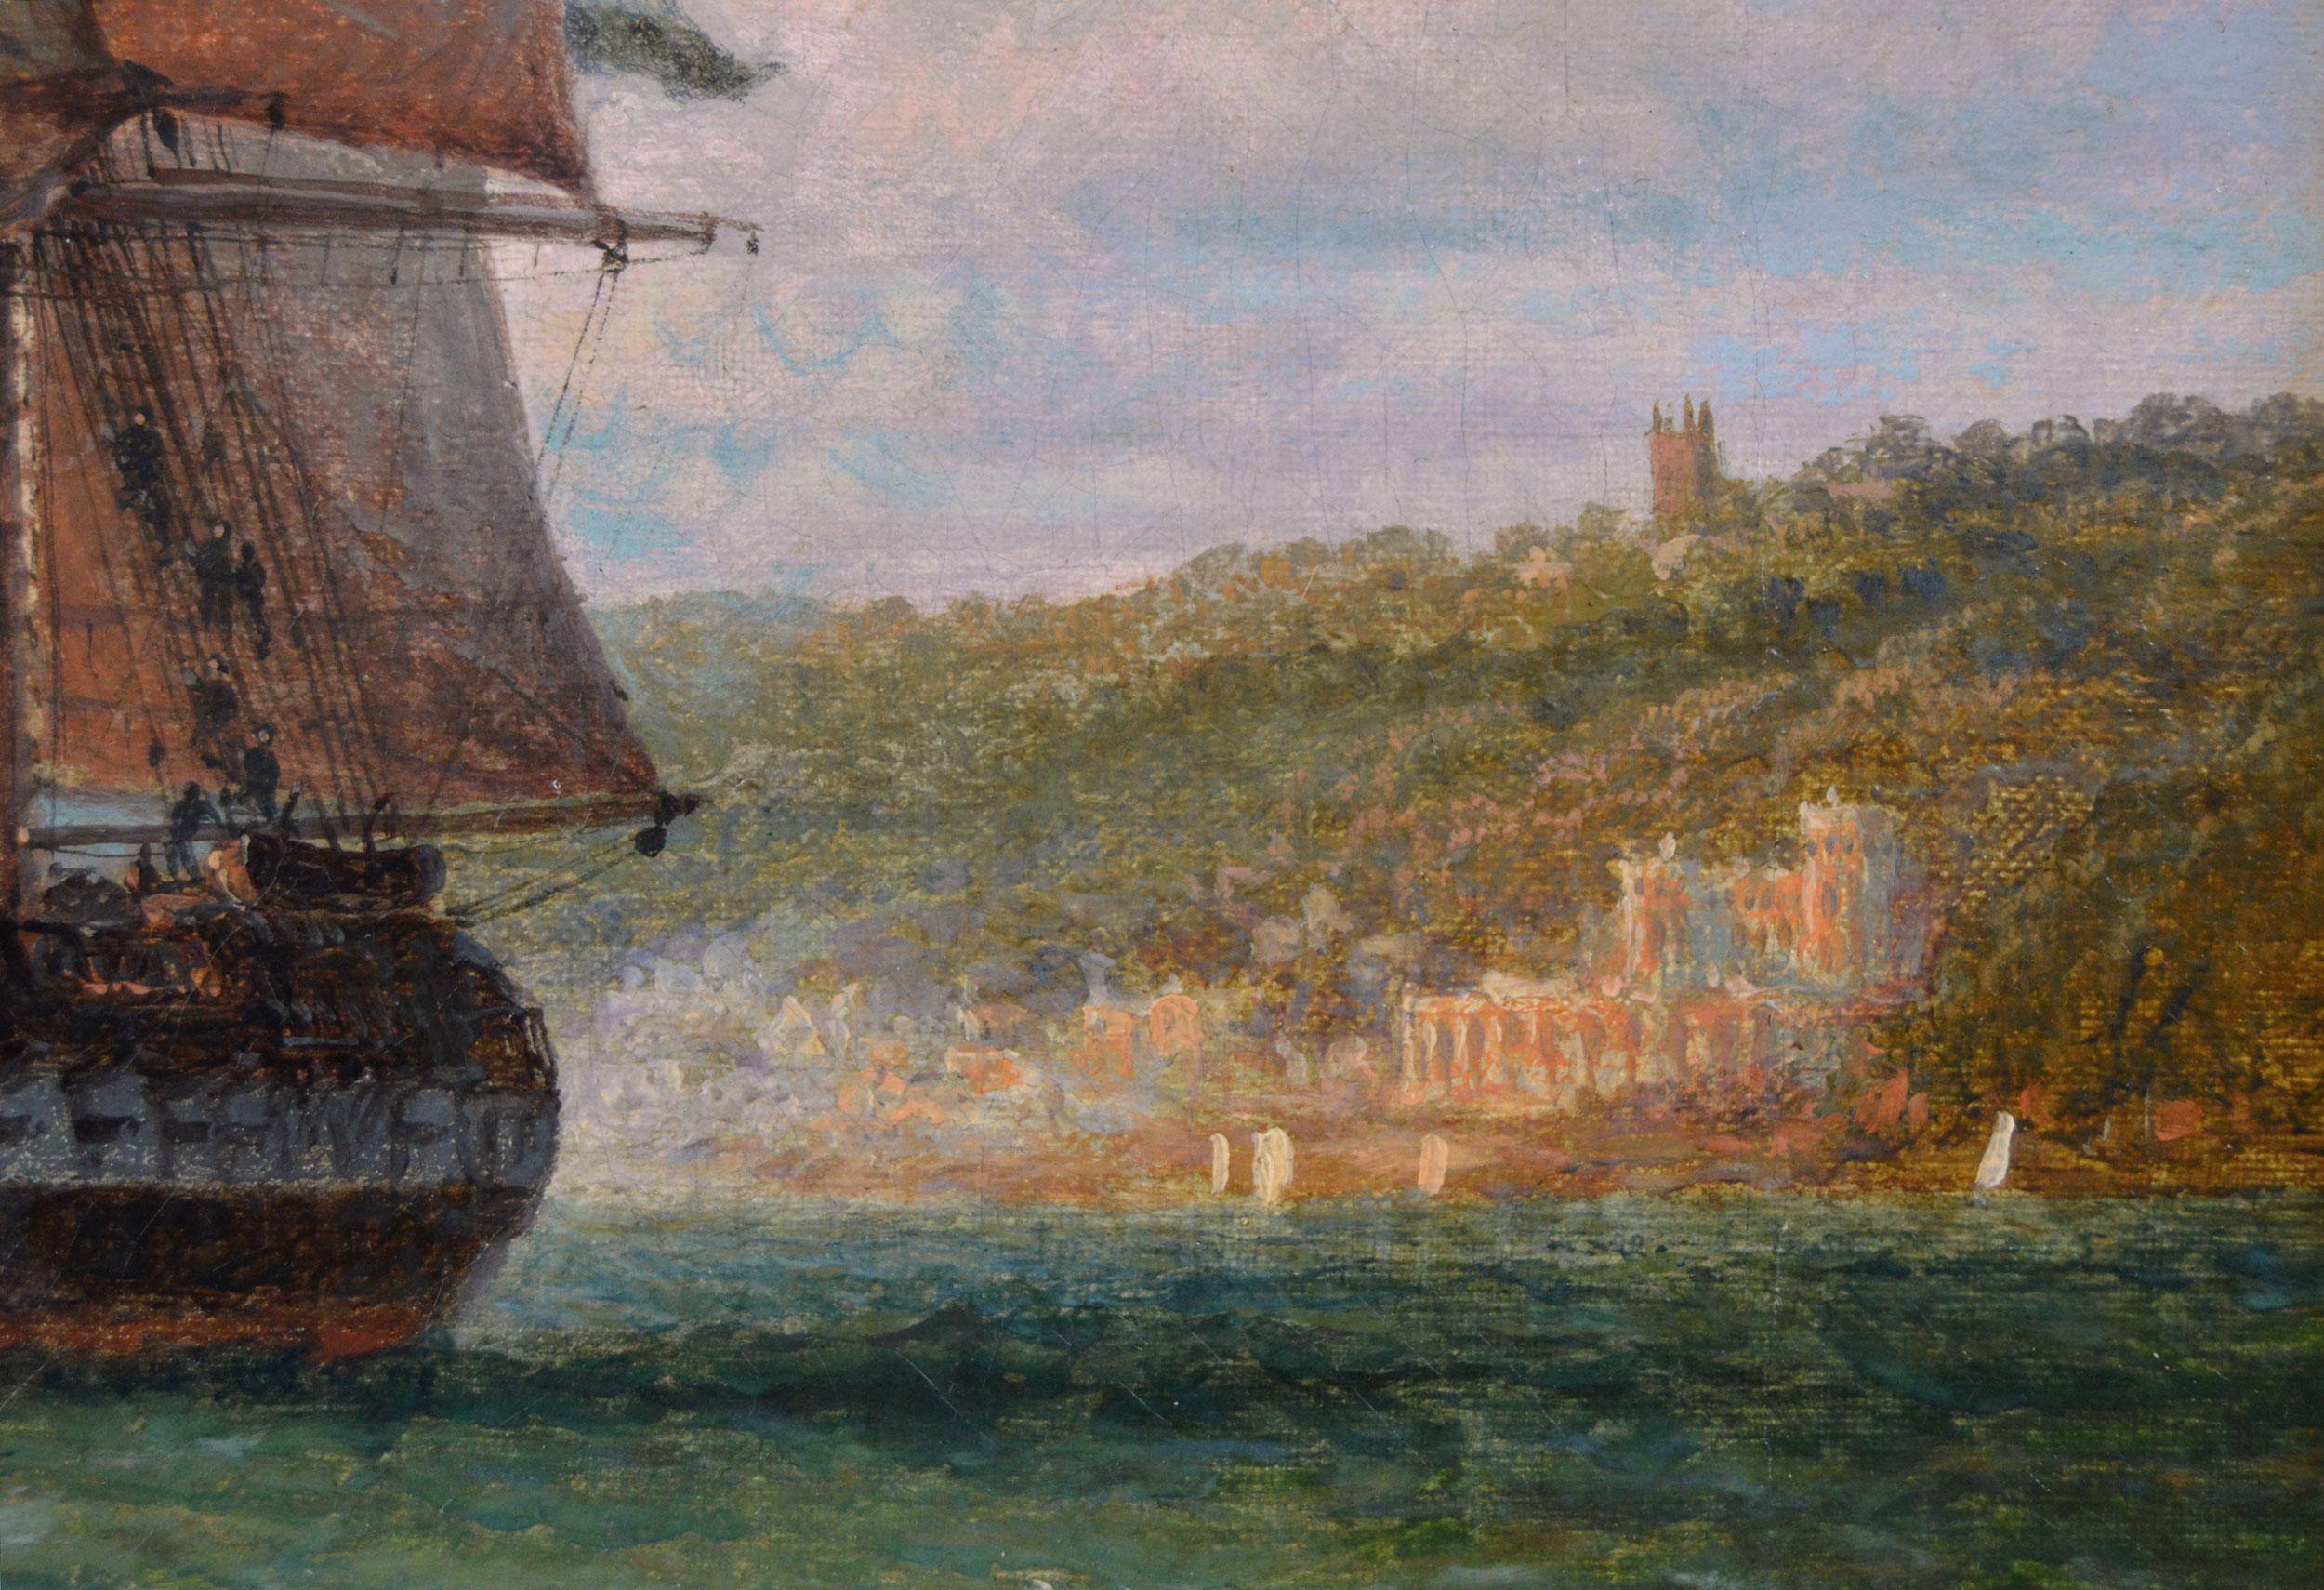 19th Century seascape oil painting of a guardship firing a salute off a coast - Victorian Painting by Henry Thomas Dawson